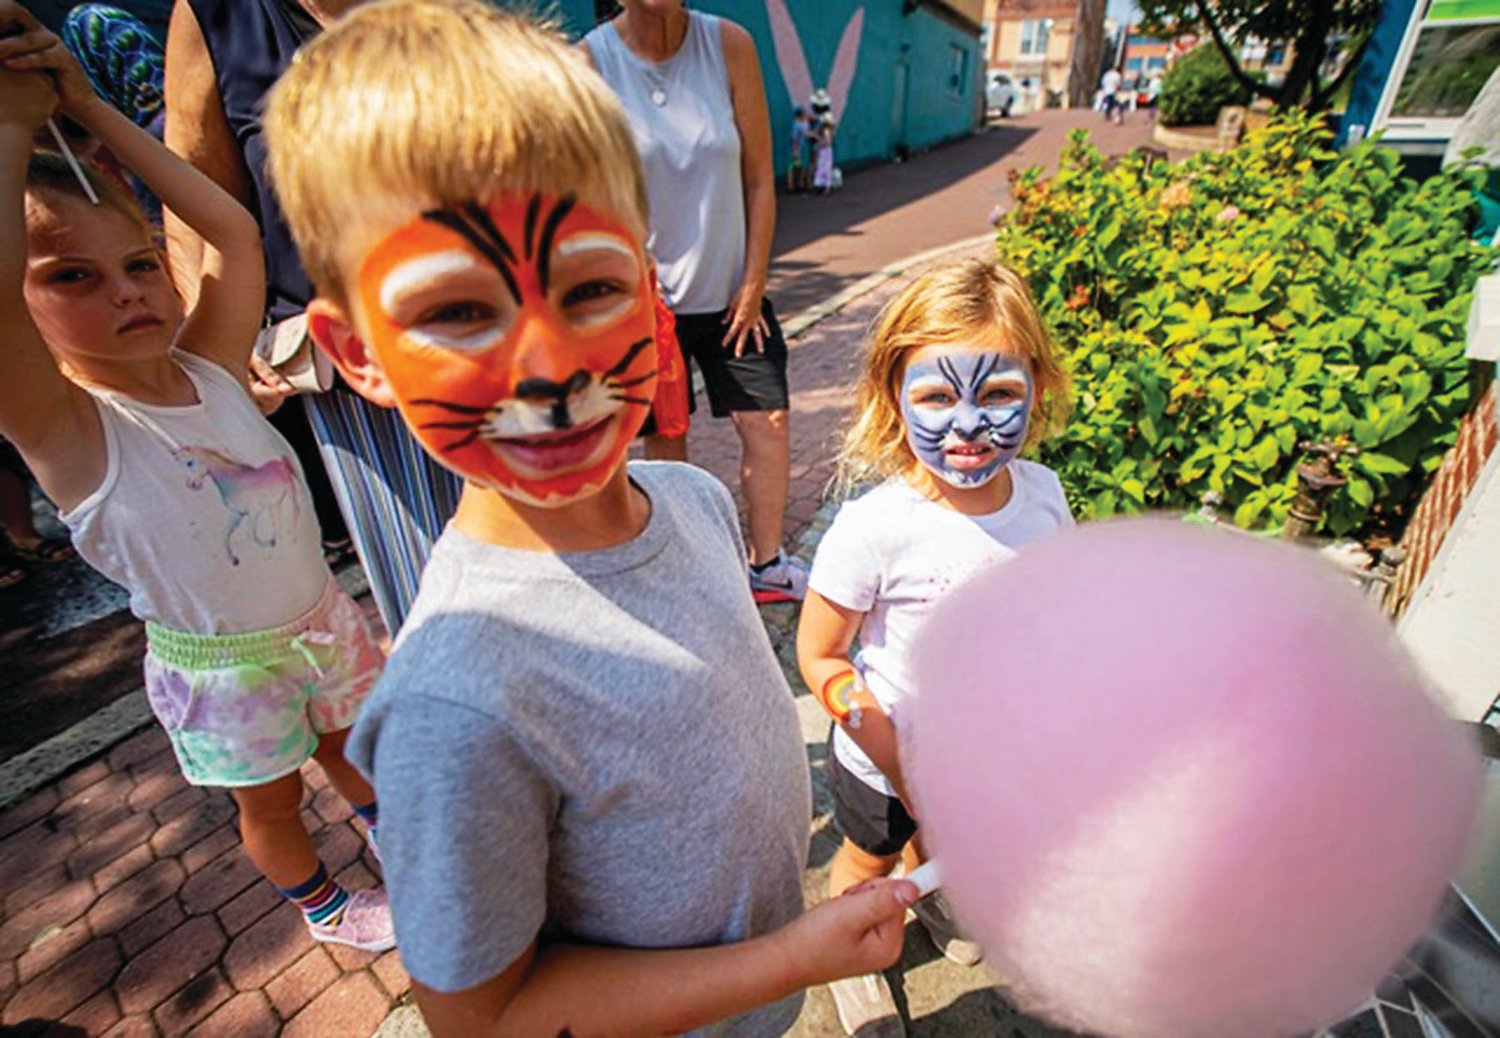 Lucas Simmons and sister Harlow Simmons enjoy some cotton candy from Evolution Candy in Doylestown.